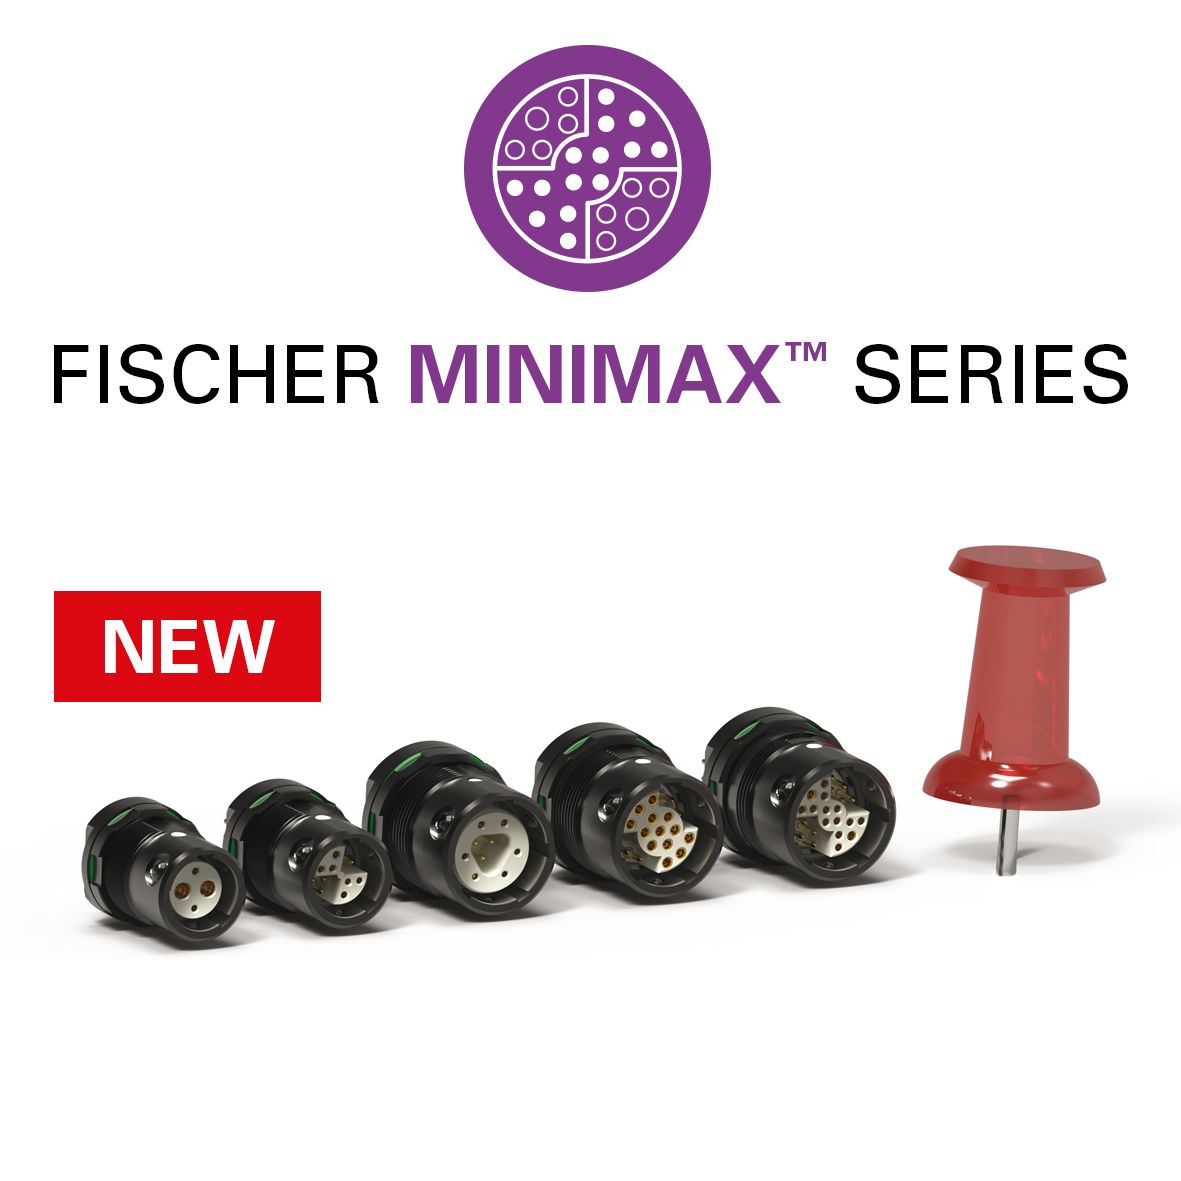 New MiniMax USB 3.0 and UltiMate Power solutions from Fischer Connectors